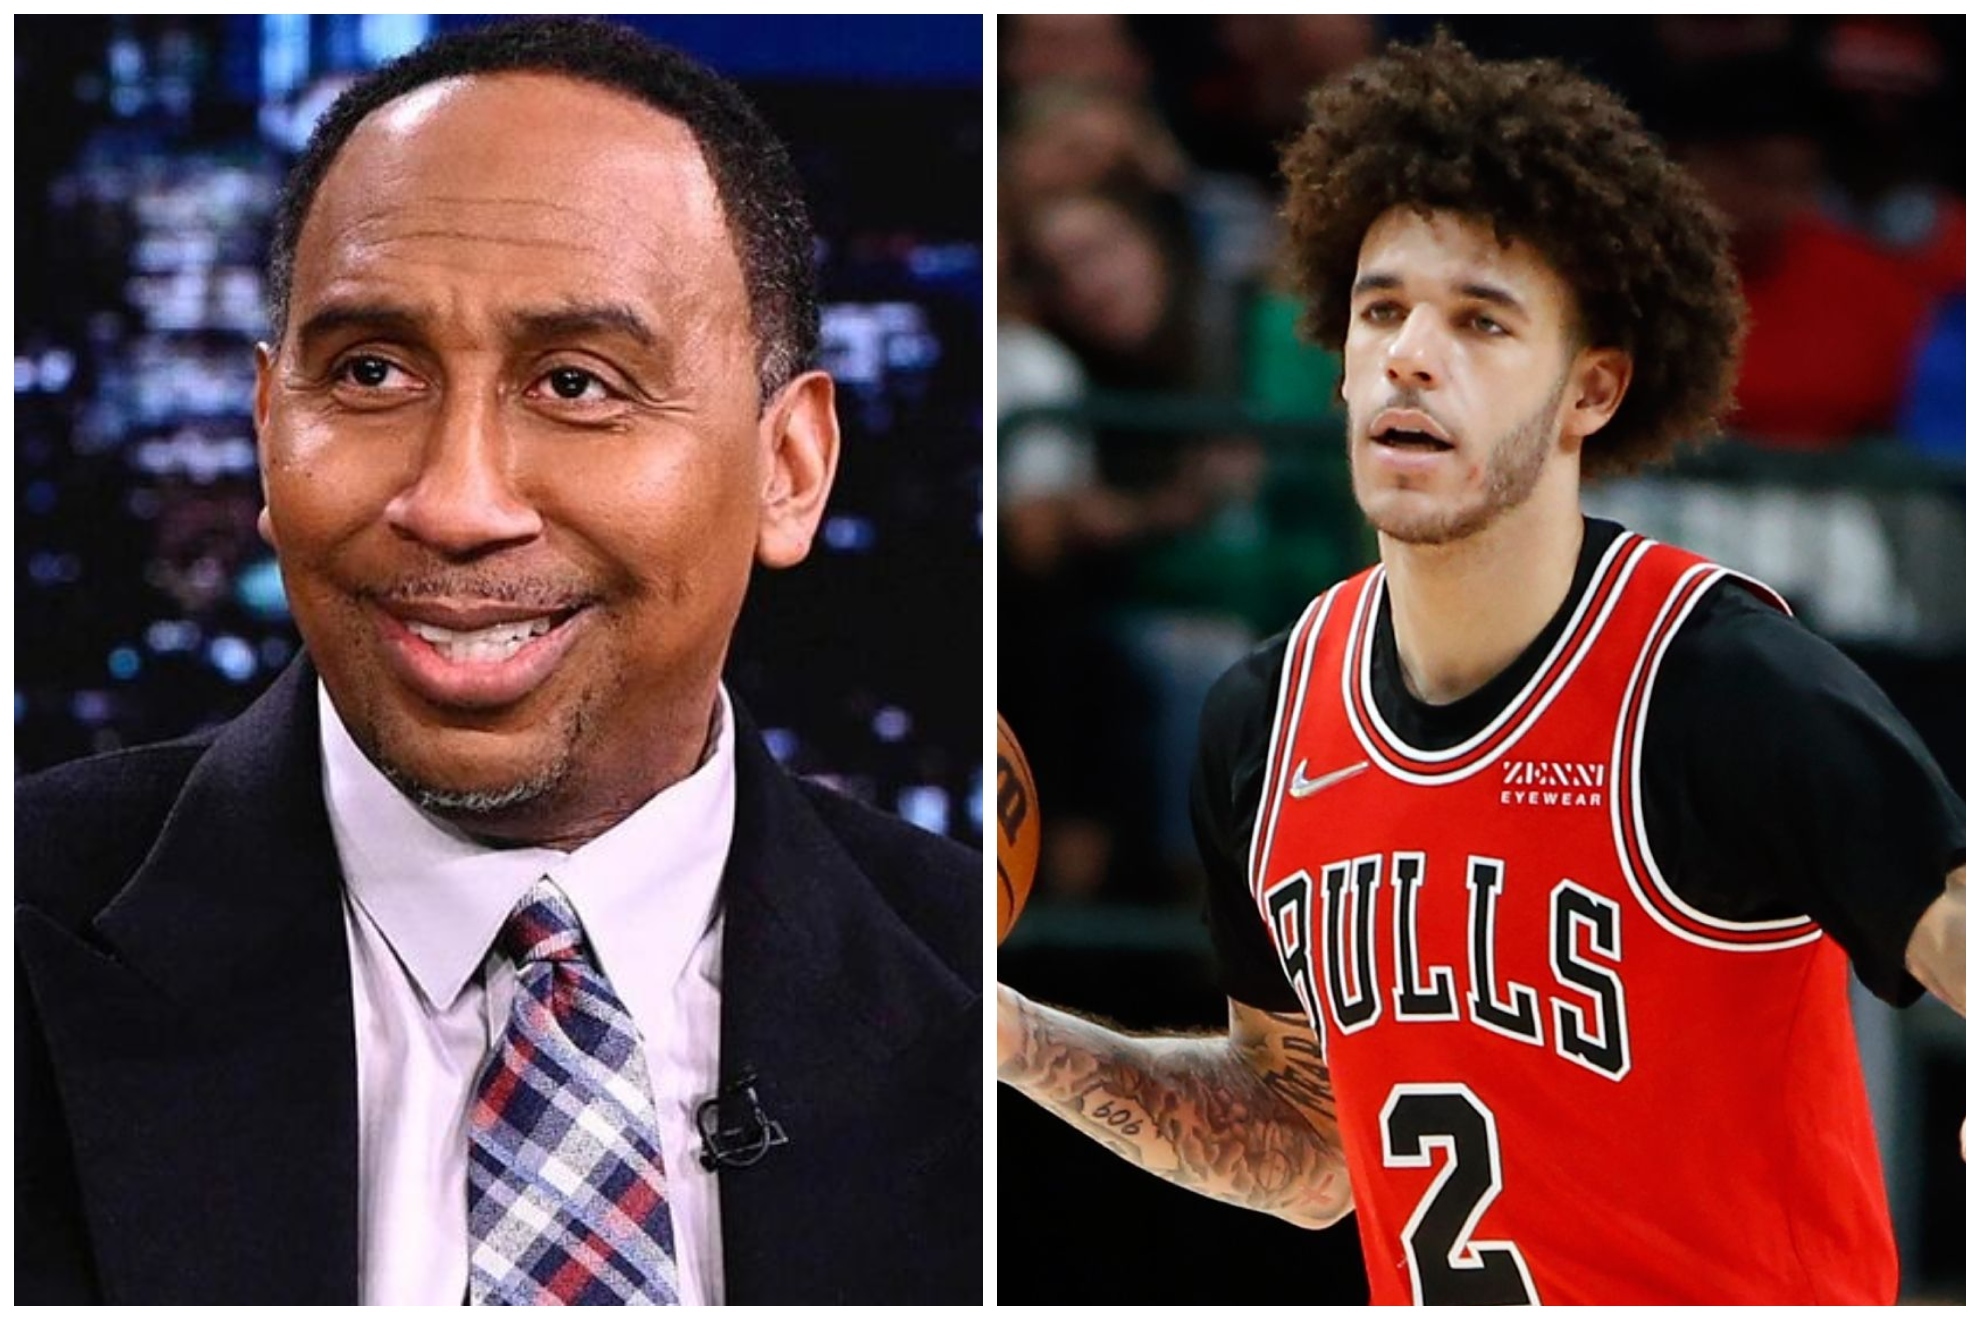 Stephen A. Smith and Lonzo Ball